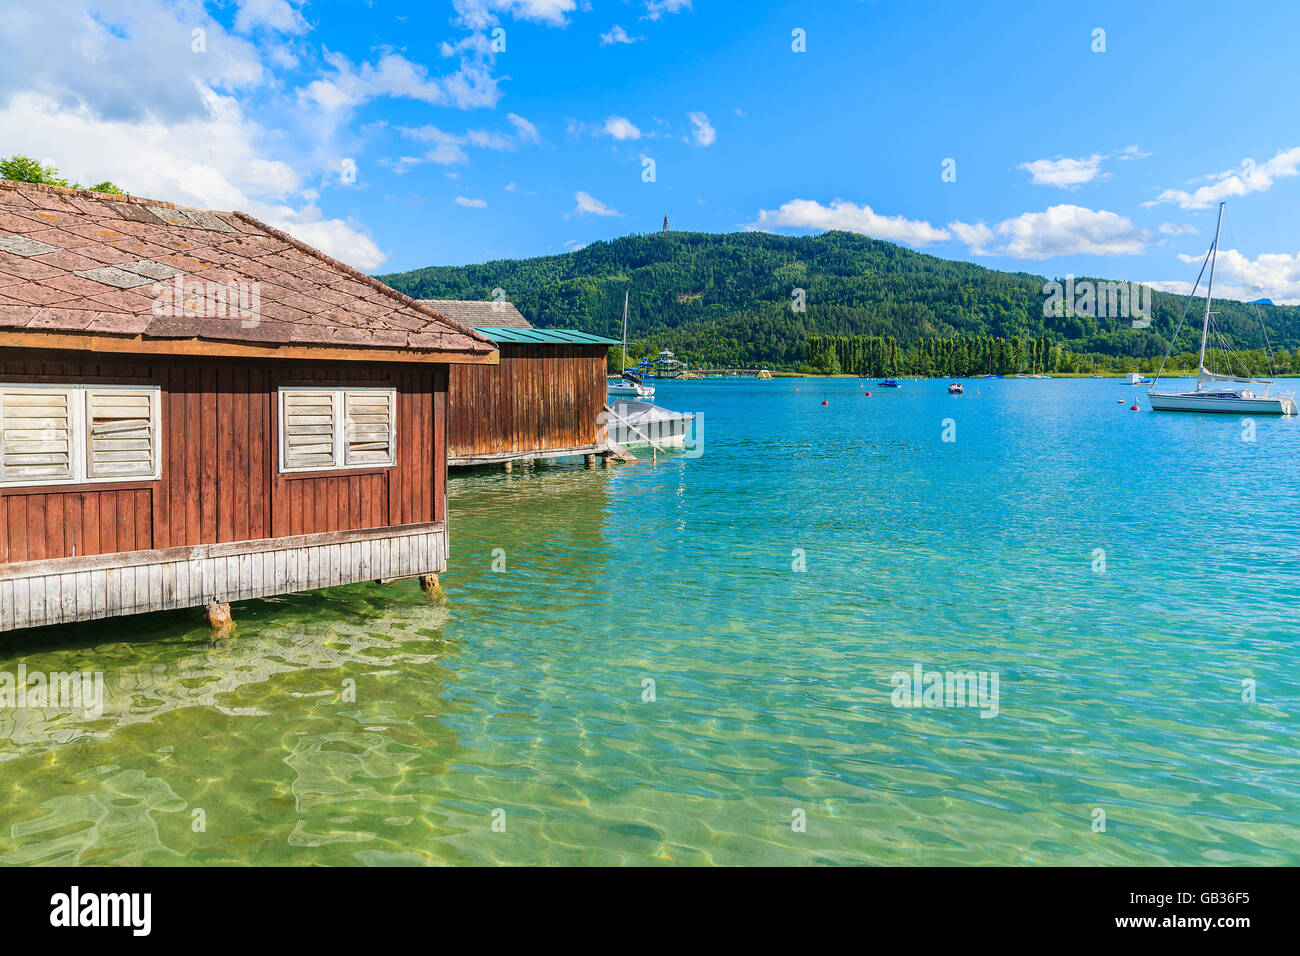 Wooden traditional boat house on shore of Worthersee lake in summer, Austria Stock Photo